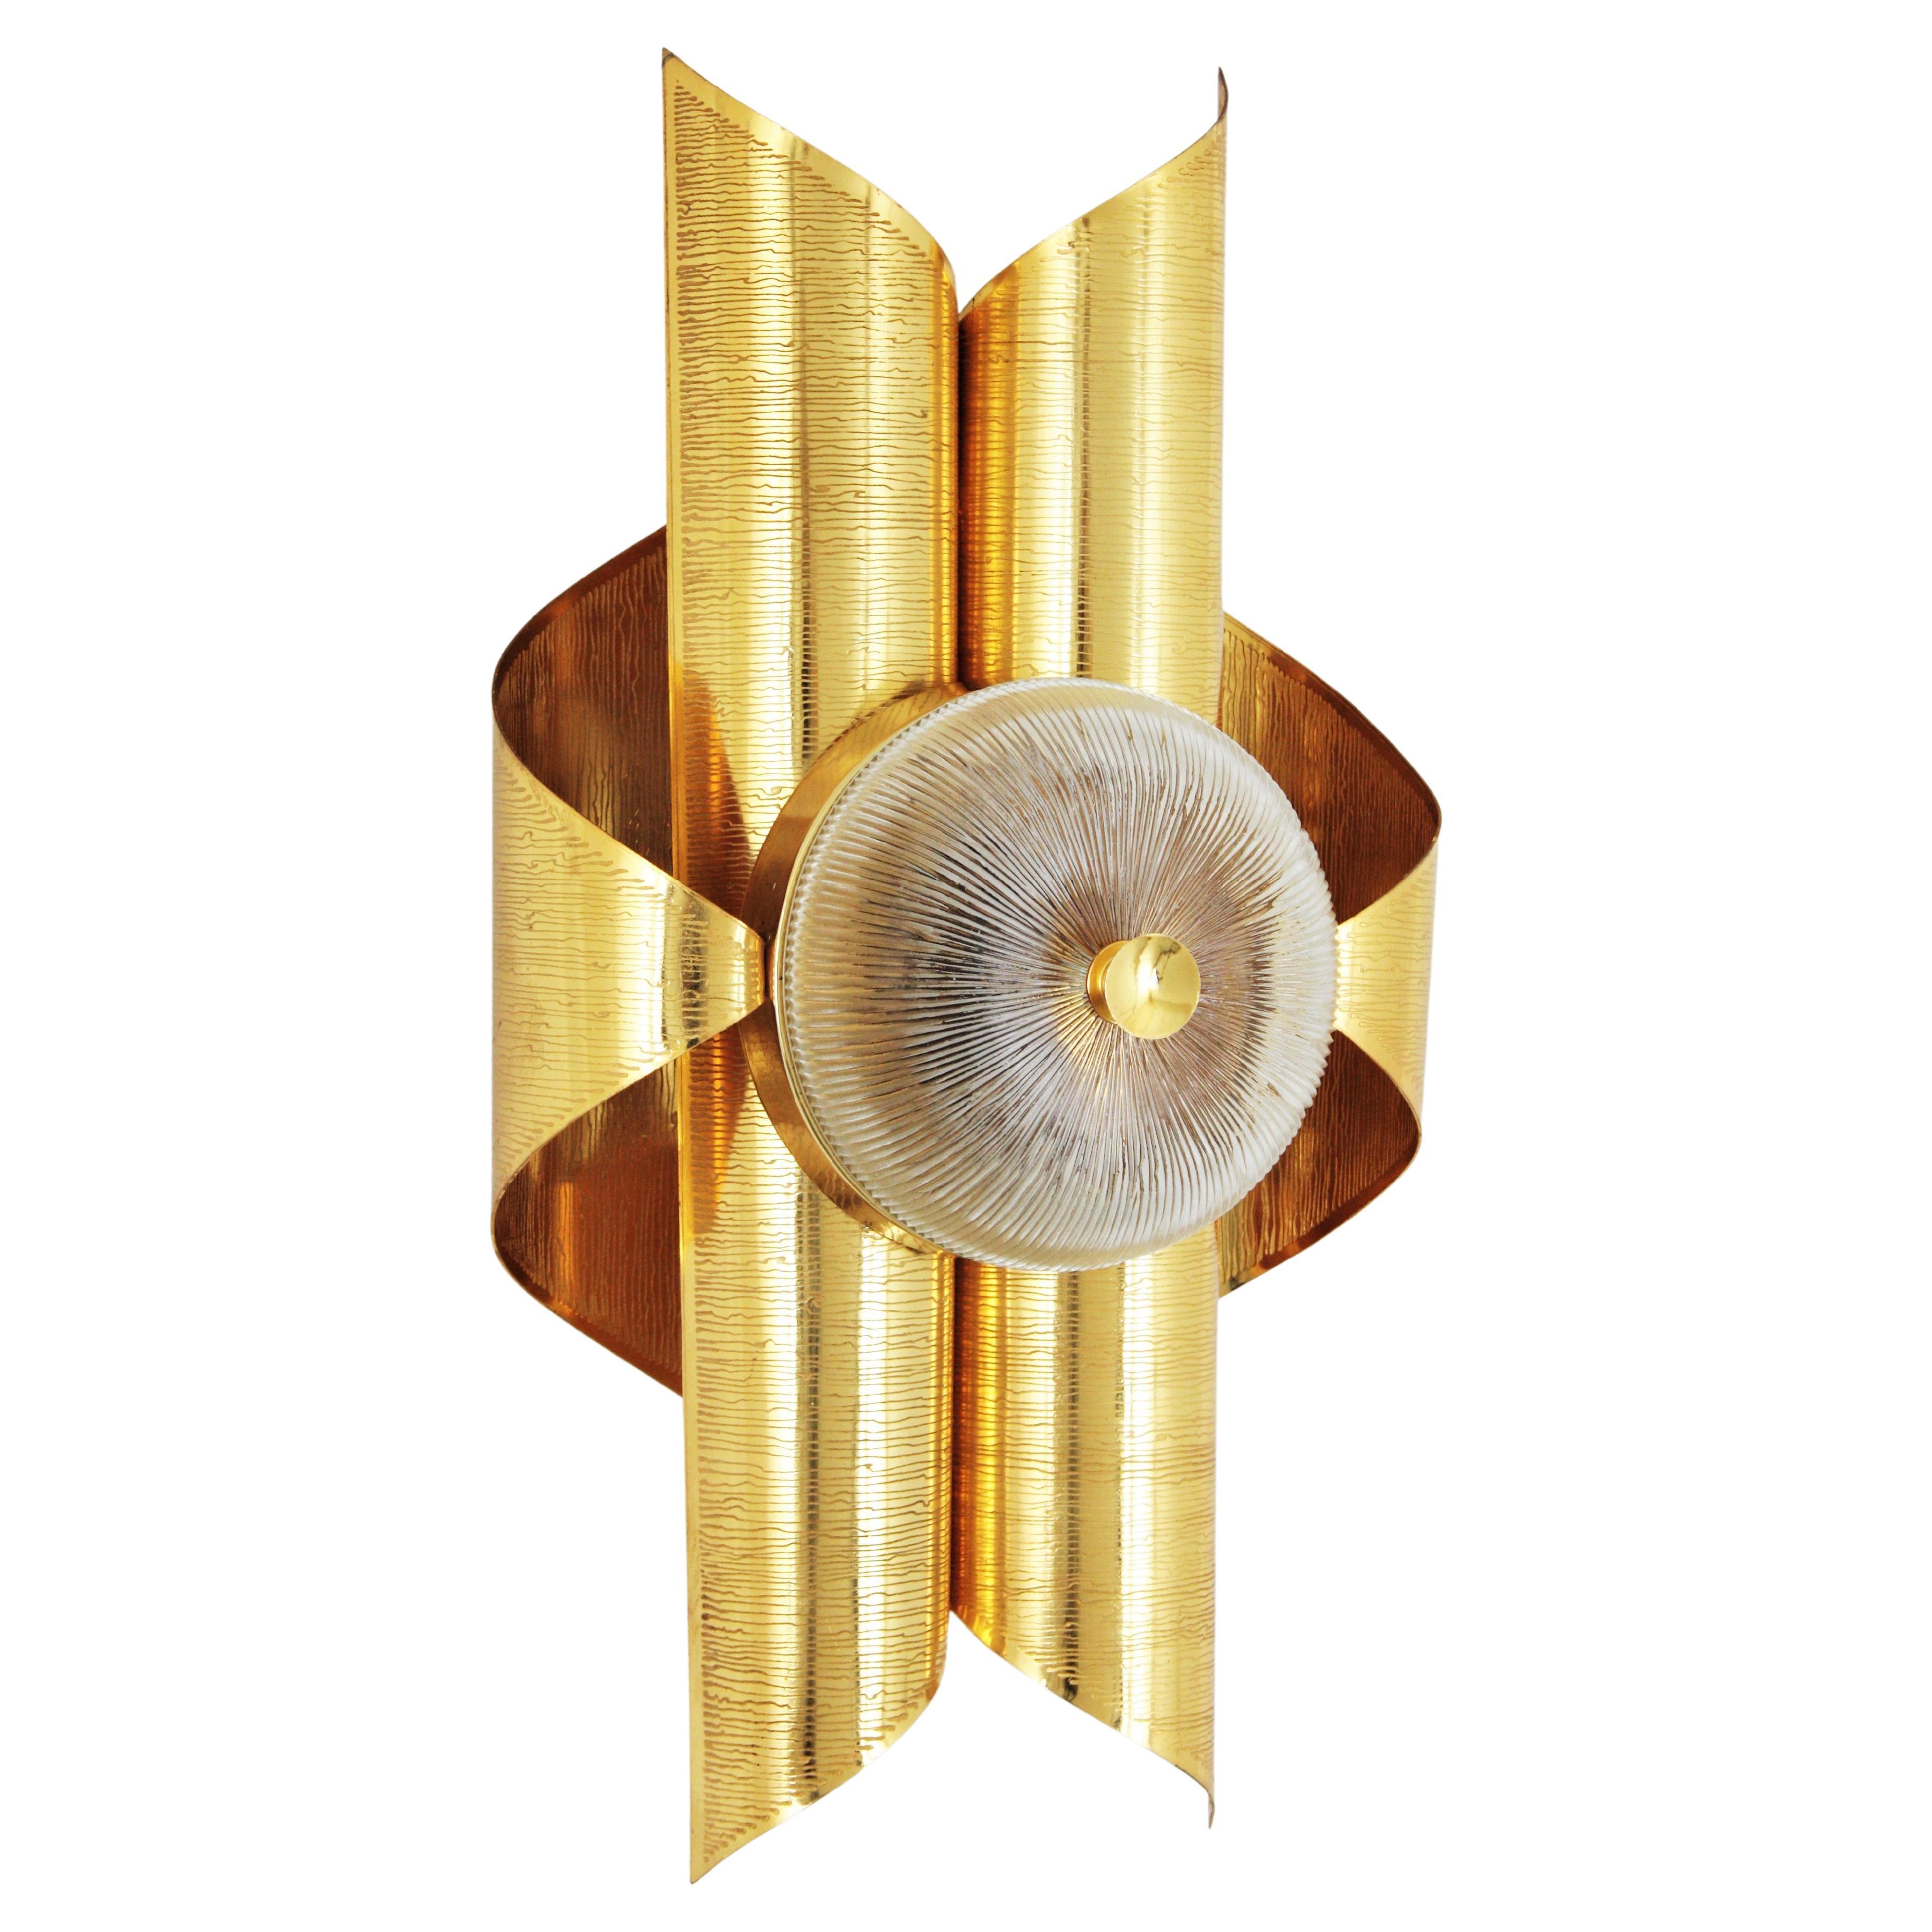 Sciolari Inspired Italian Modernist Gold-Plated Brass and Glass Wall Sconce. Italy, 1960-1970.
A beautiful gold-plated brass and glass scroll shaped wall sconce with a circular glass shade, 
This wall lights is symmetric in design, the brass is